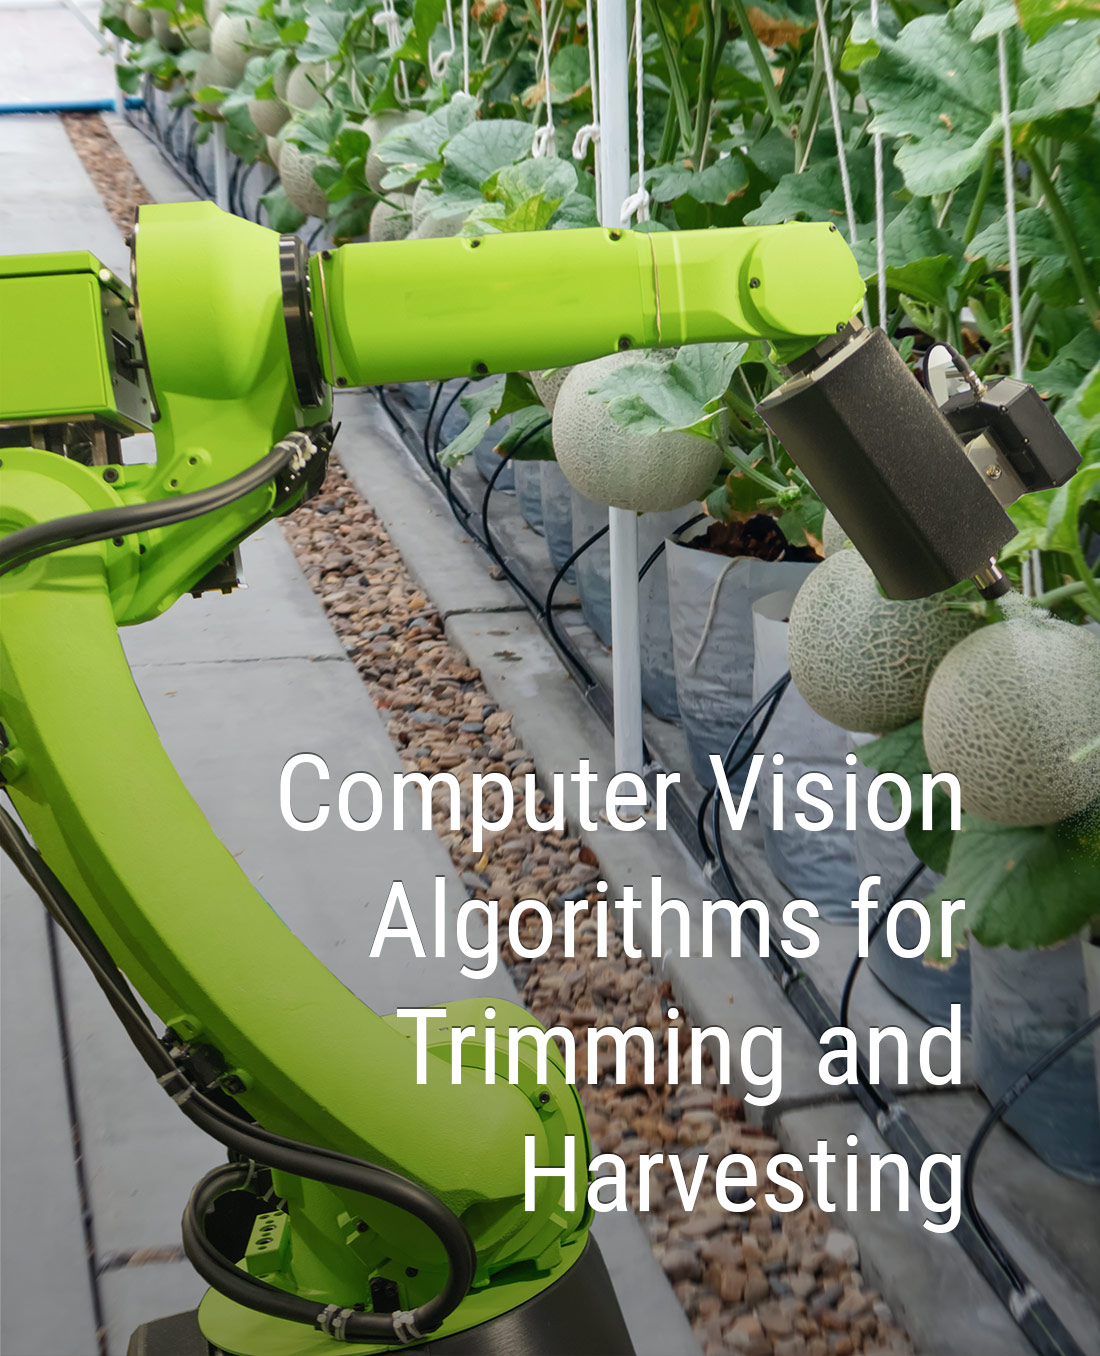 Computer Vision Algorithms for Trimming and Harvesting